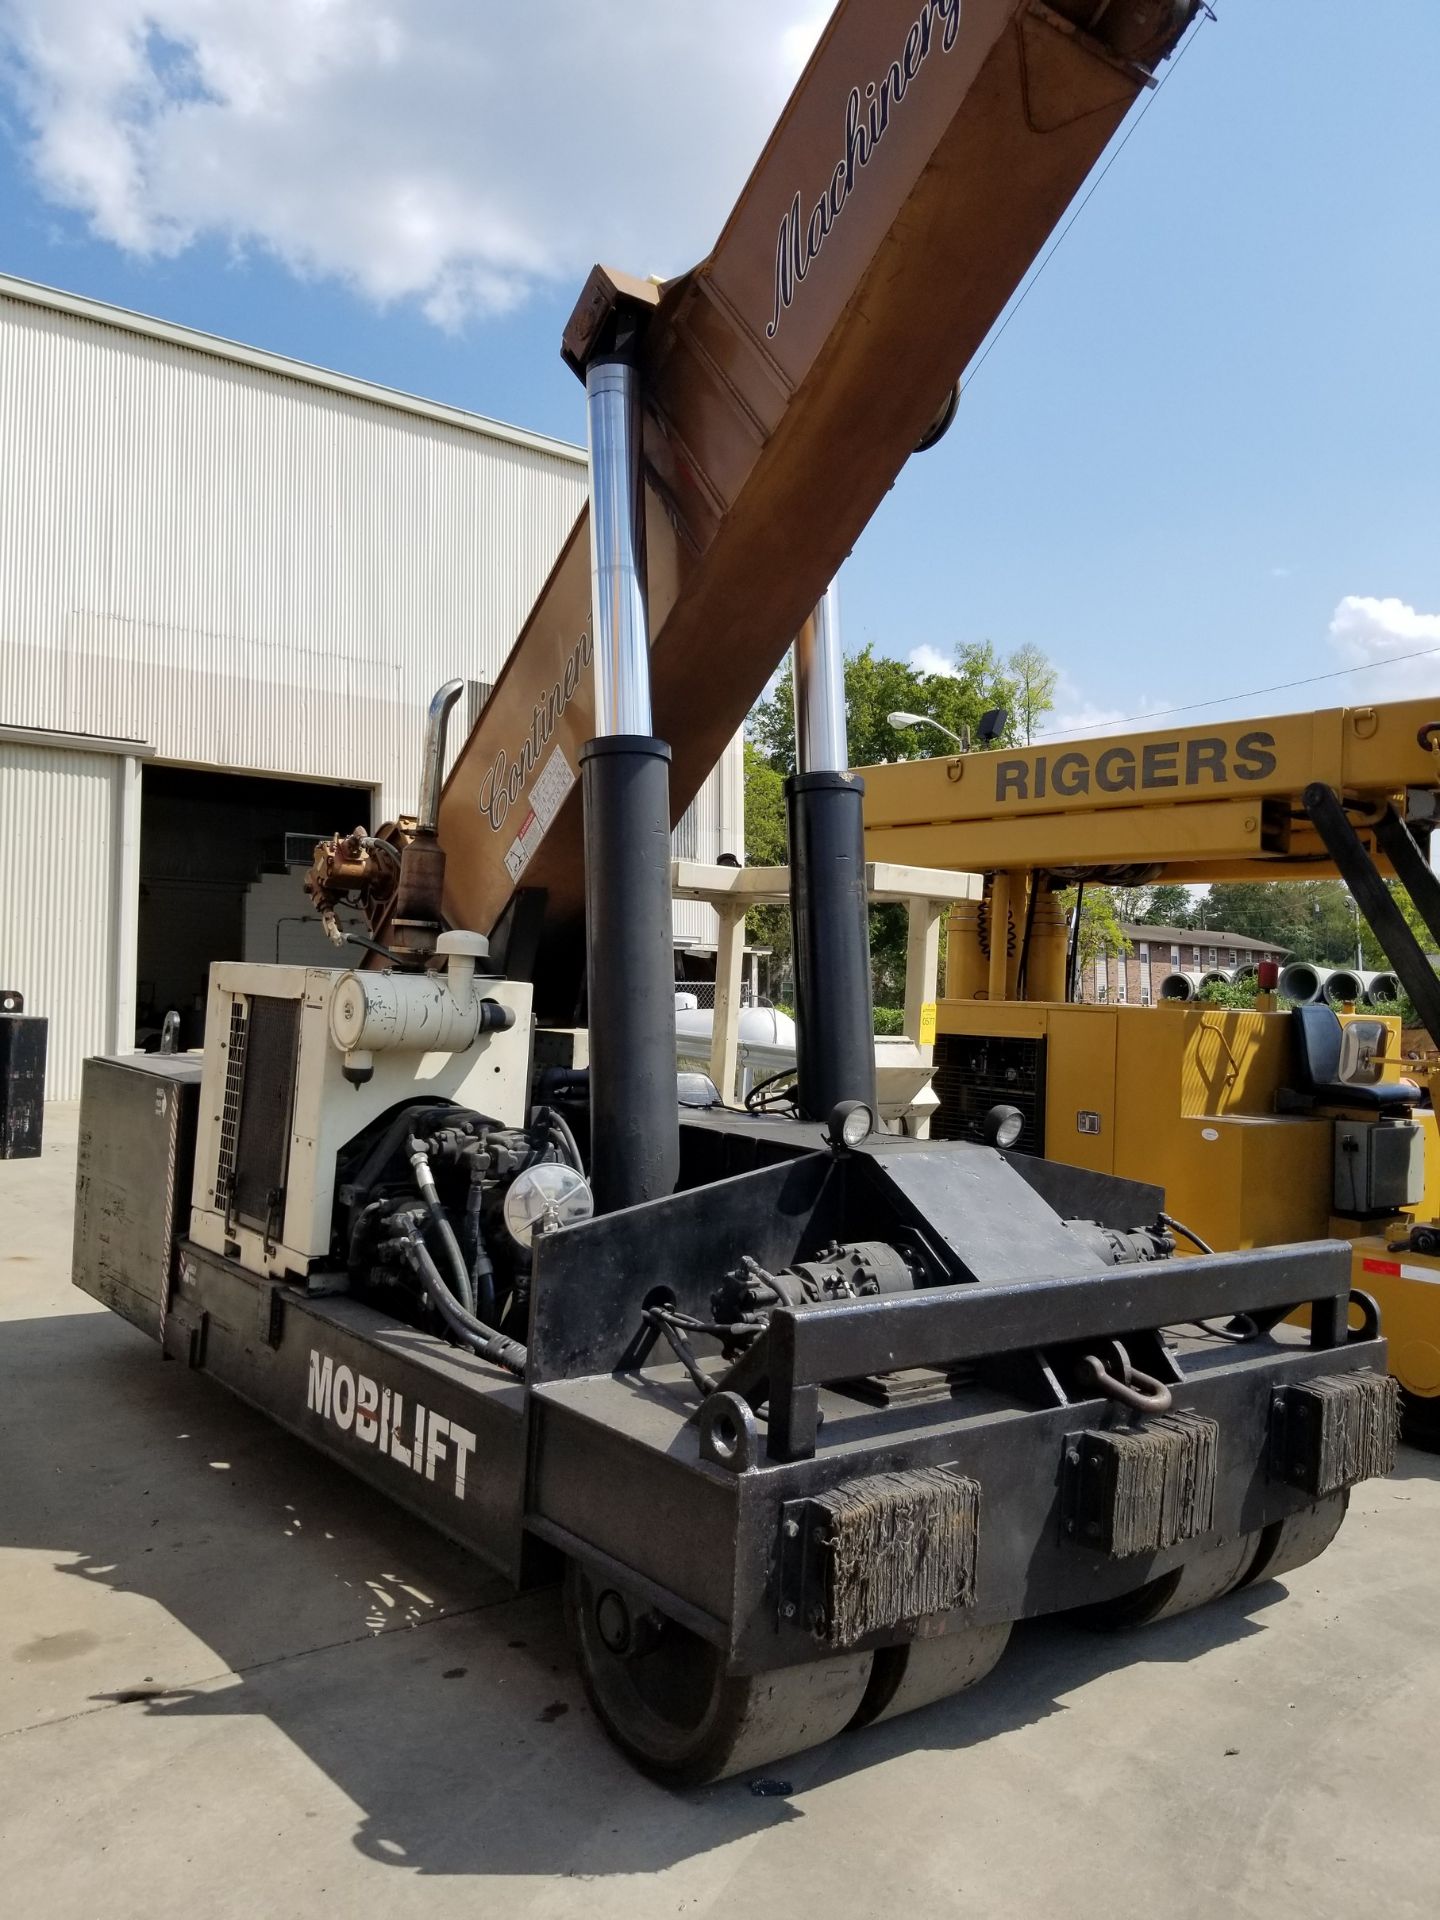 MOBILIFT 75-TON HYDRAULIC MOBILE CRANE; MODEL MBL075, S/N MBL07500, 1,928 HOURS, NEW CABLE - Image 4 of 4